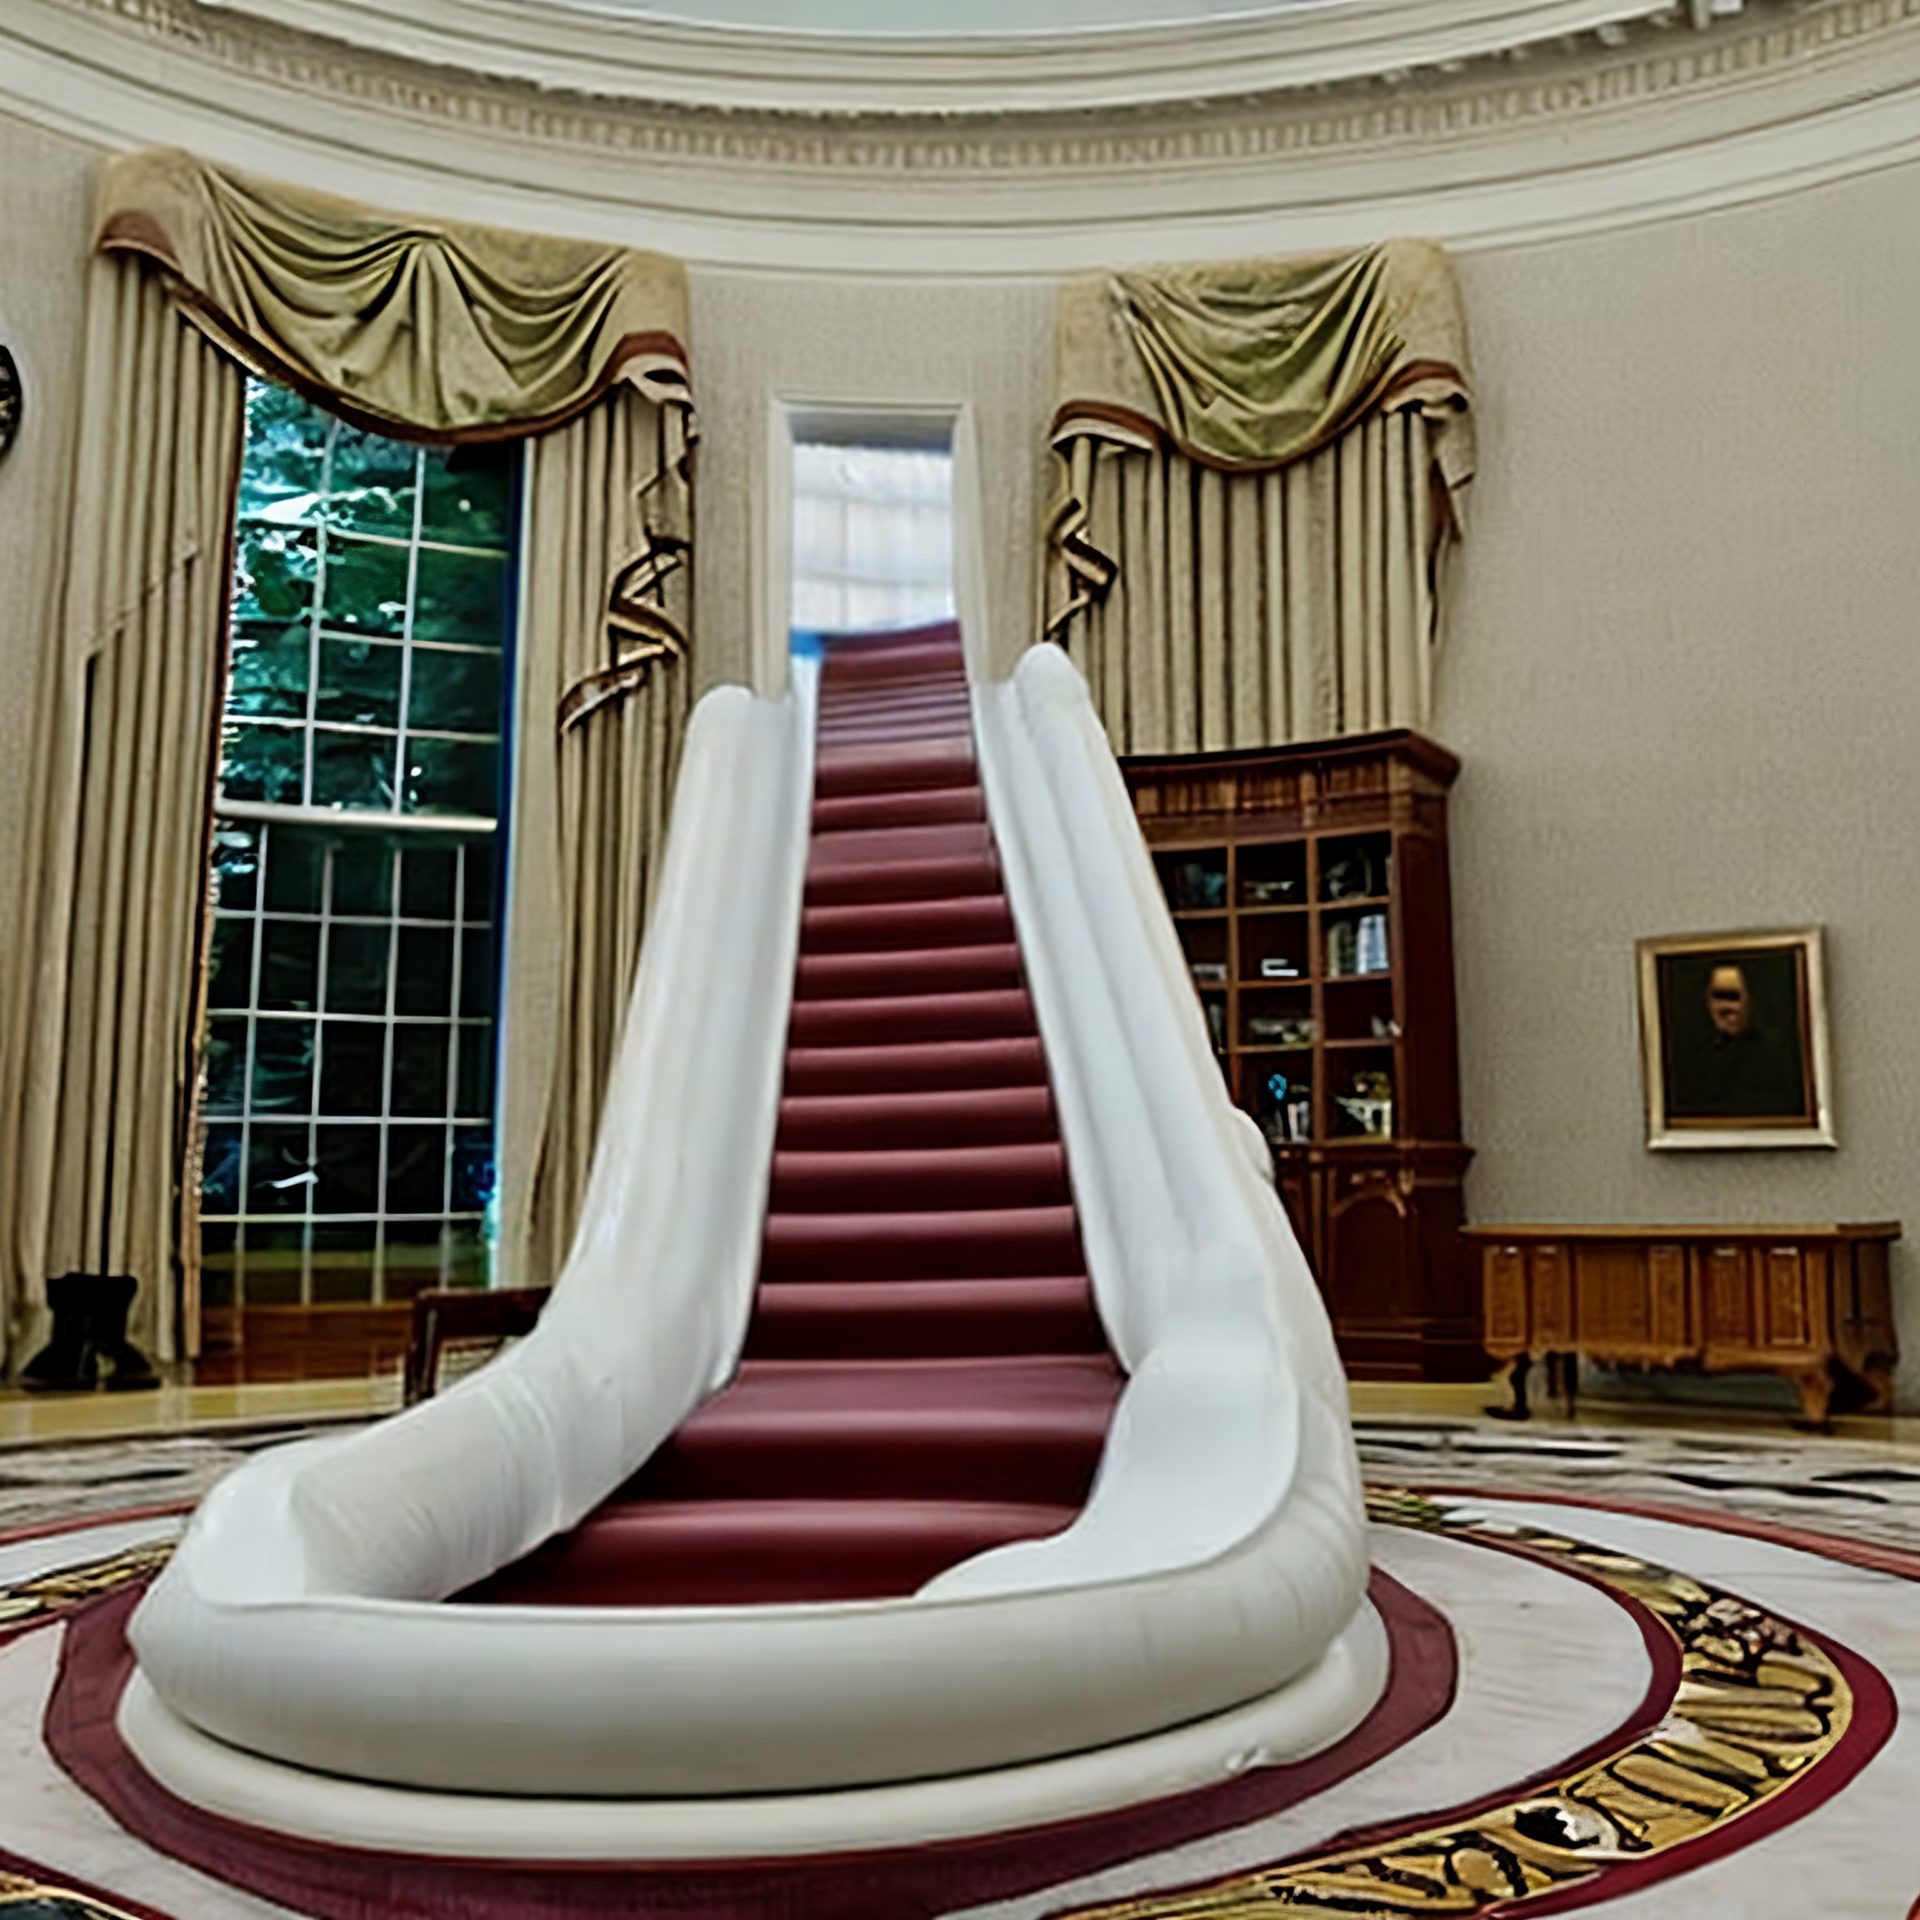 Water slide in the Oval Office